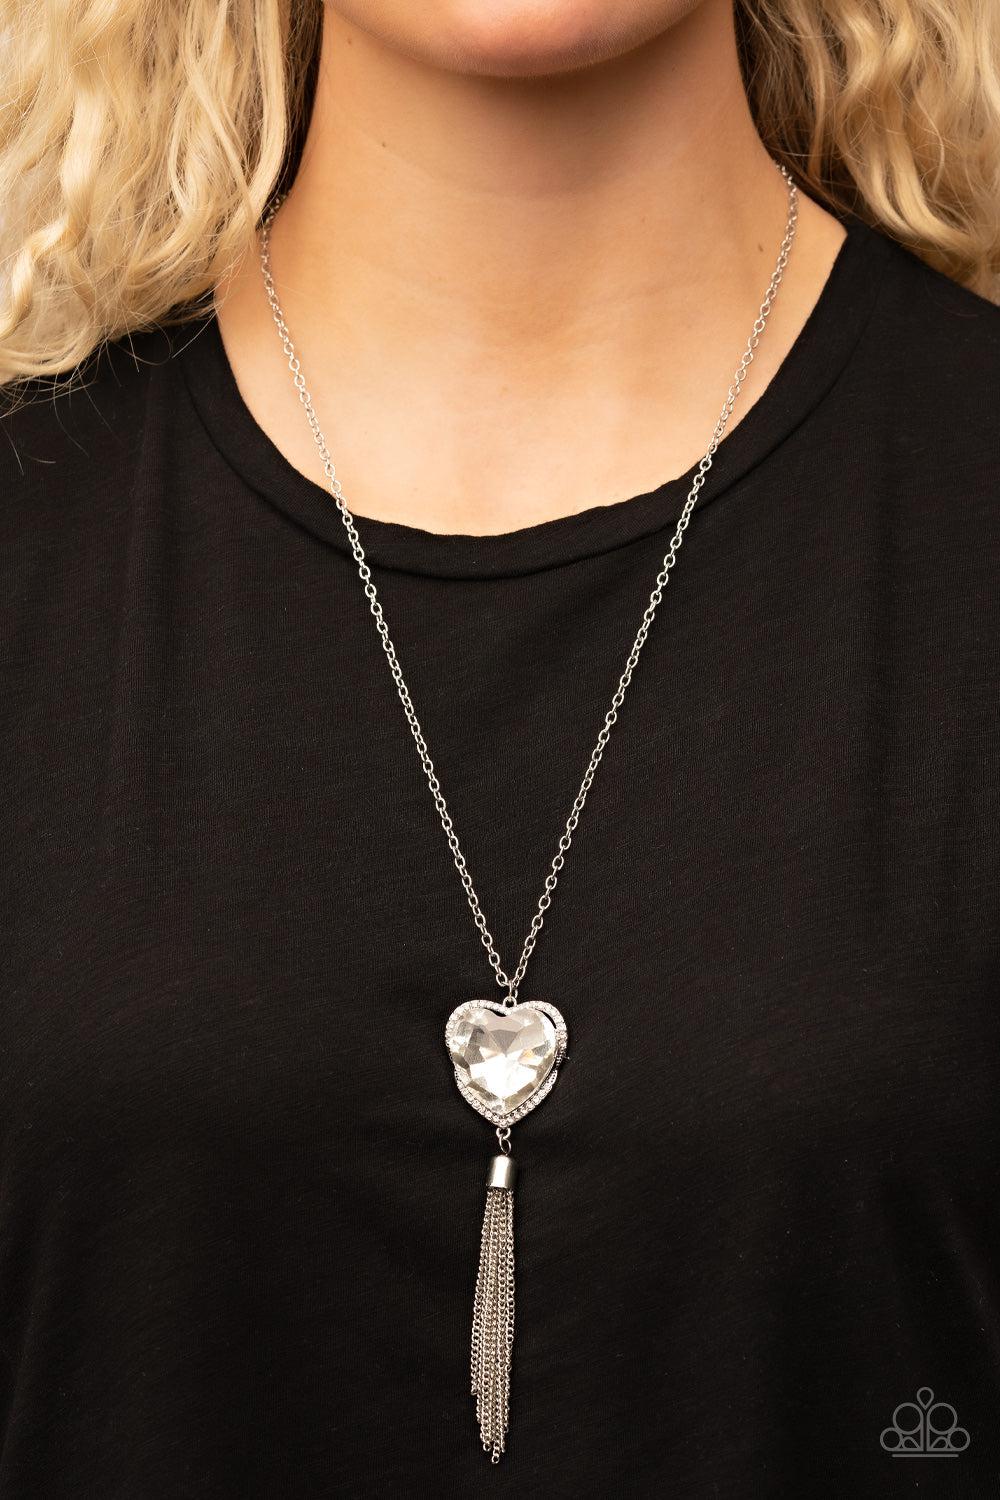 Finding My Forever White Rhinestone Heart Necklace - Paparazzi Accessories- lightbox - CarasShop.com - $5 Jewelry by Cara Jewels